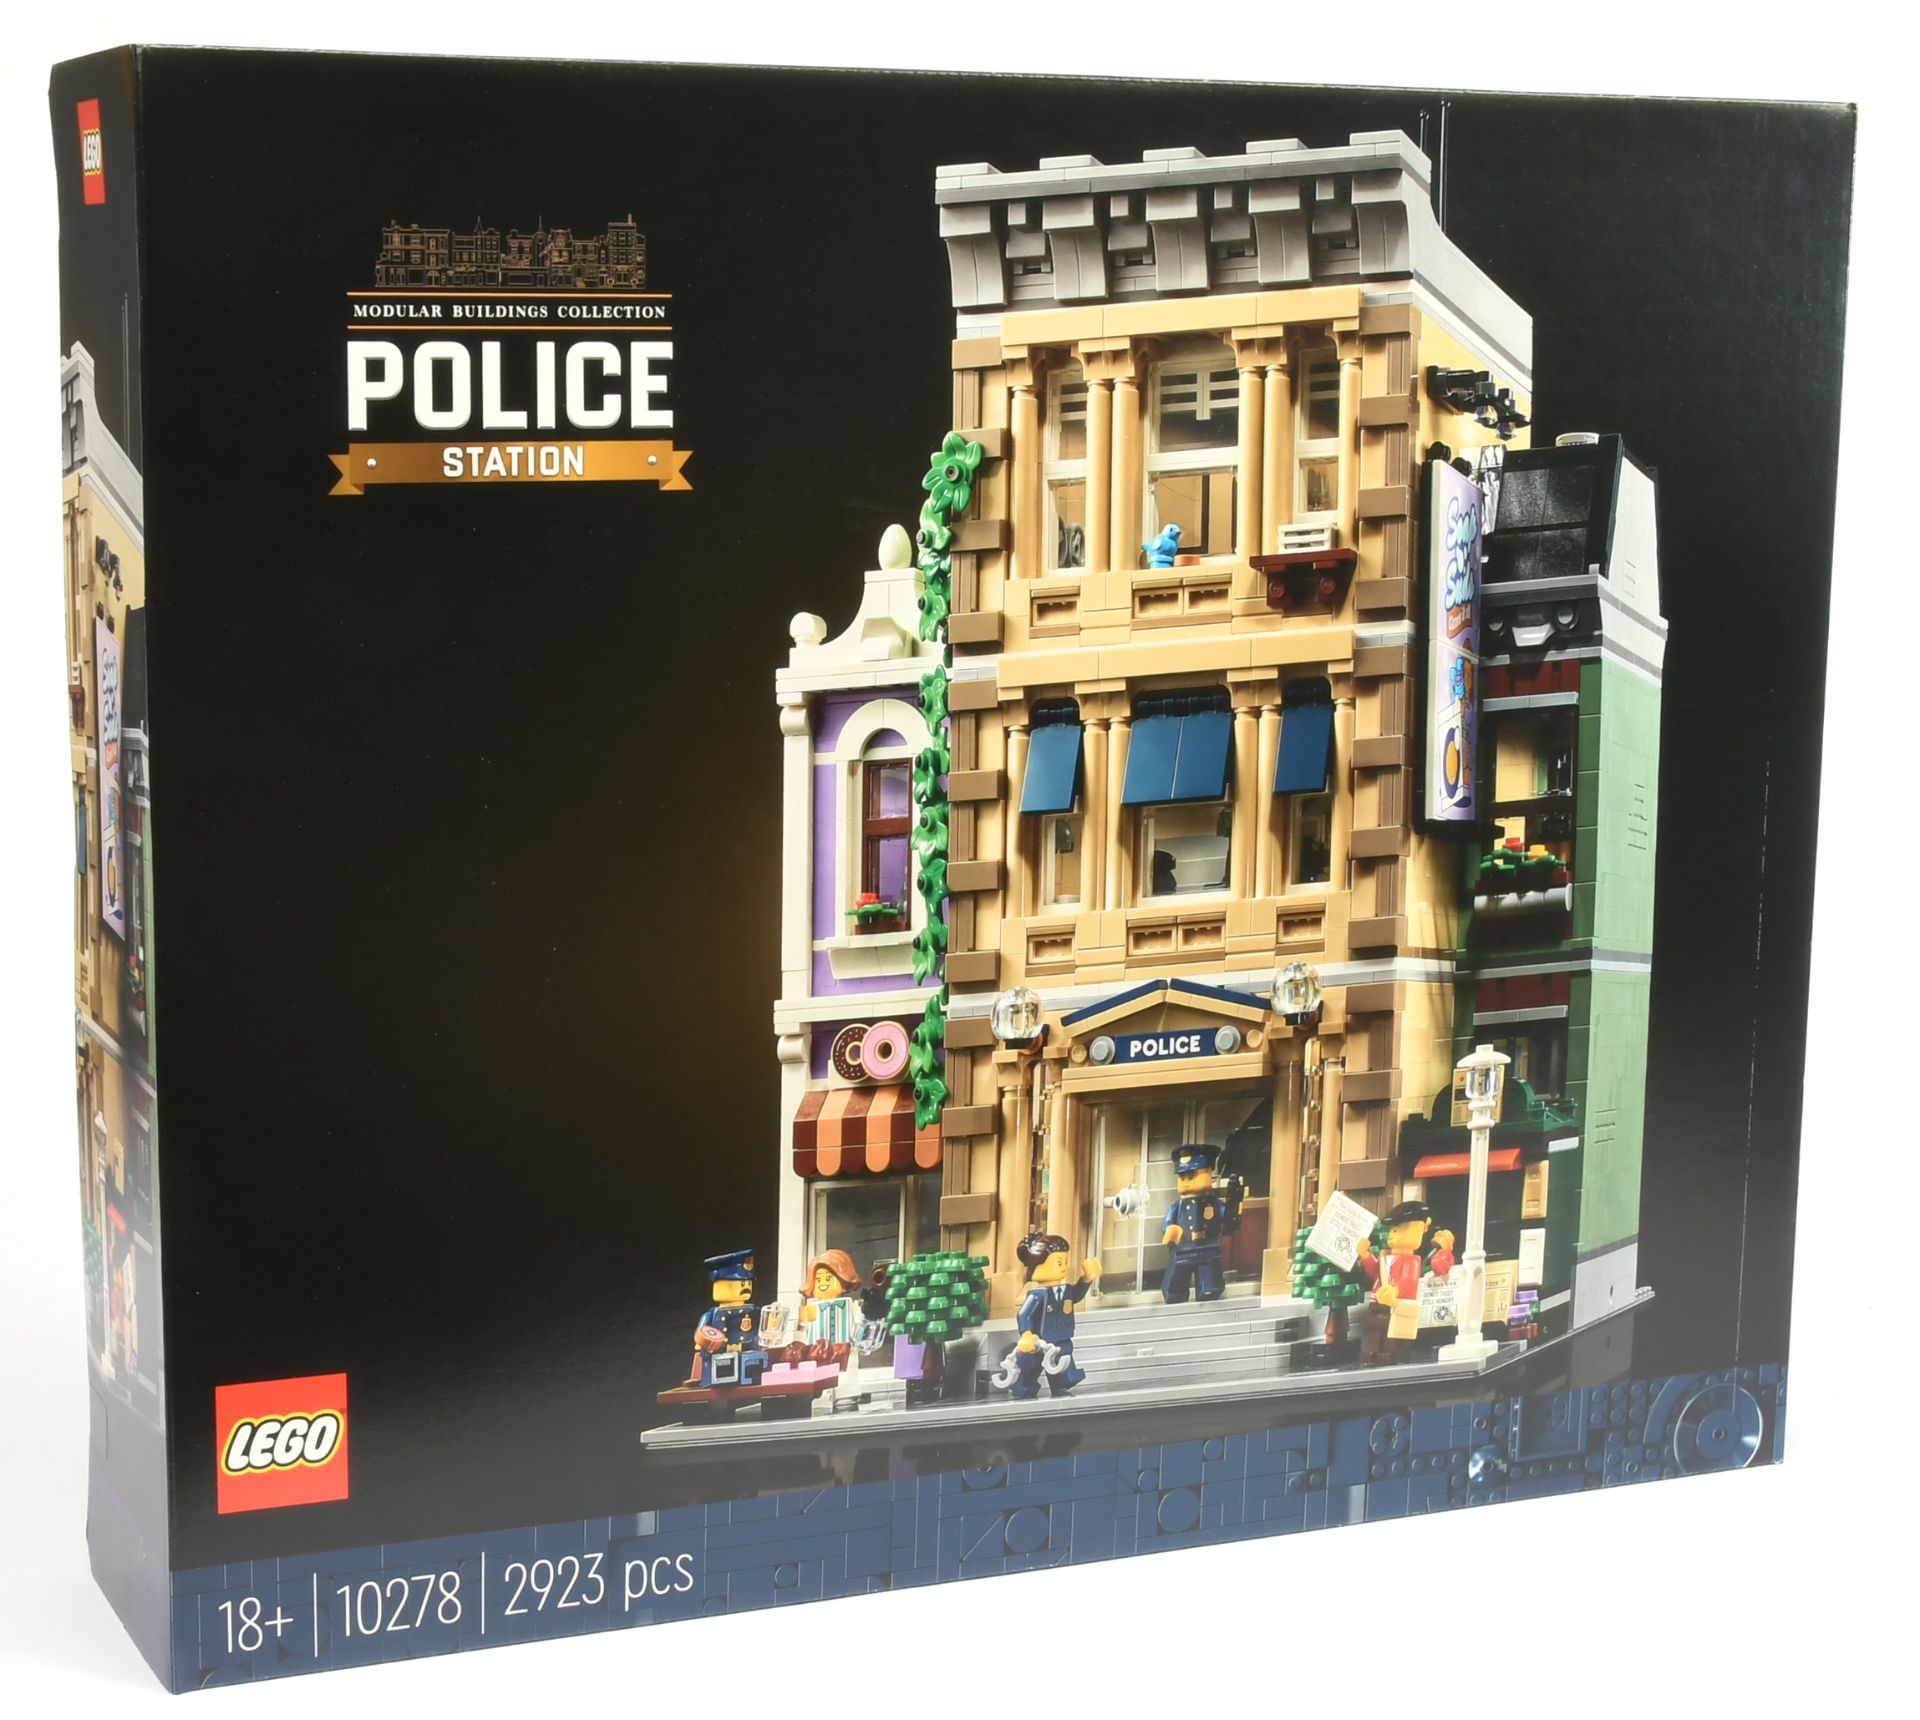 Lego 10278 Modular Buildings Collection - Police Station